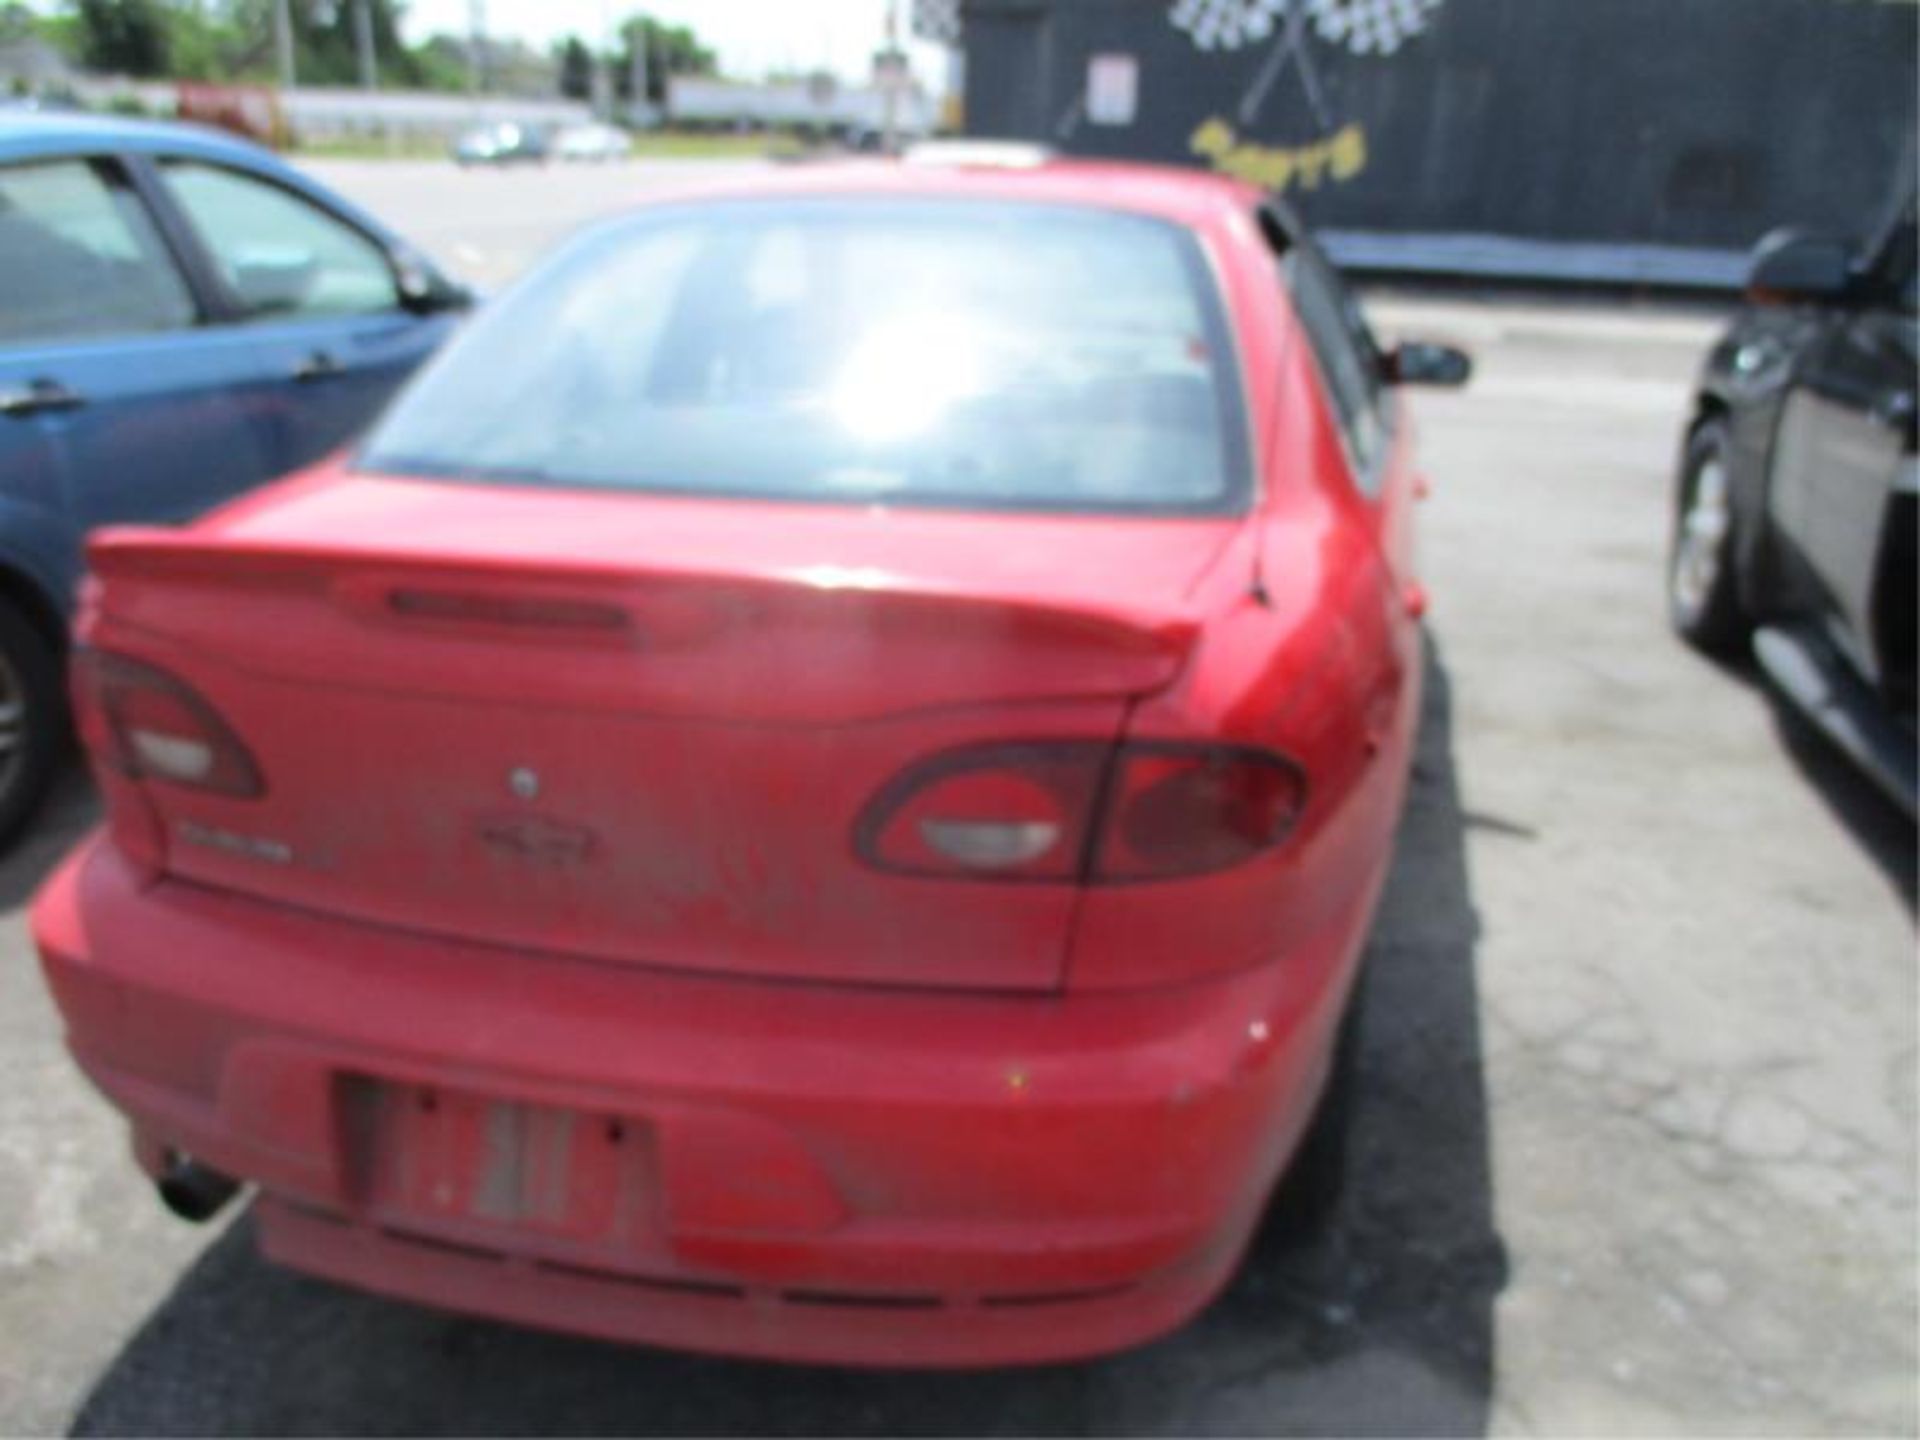 2002 Red Chevy Cavalier VIN:1G1JH52F227344735 - Image 4 of 13